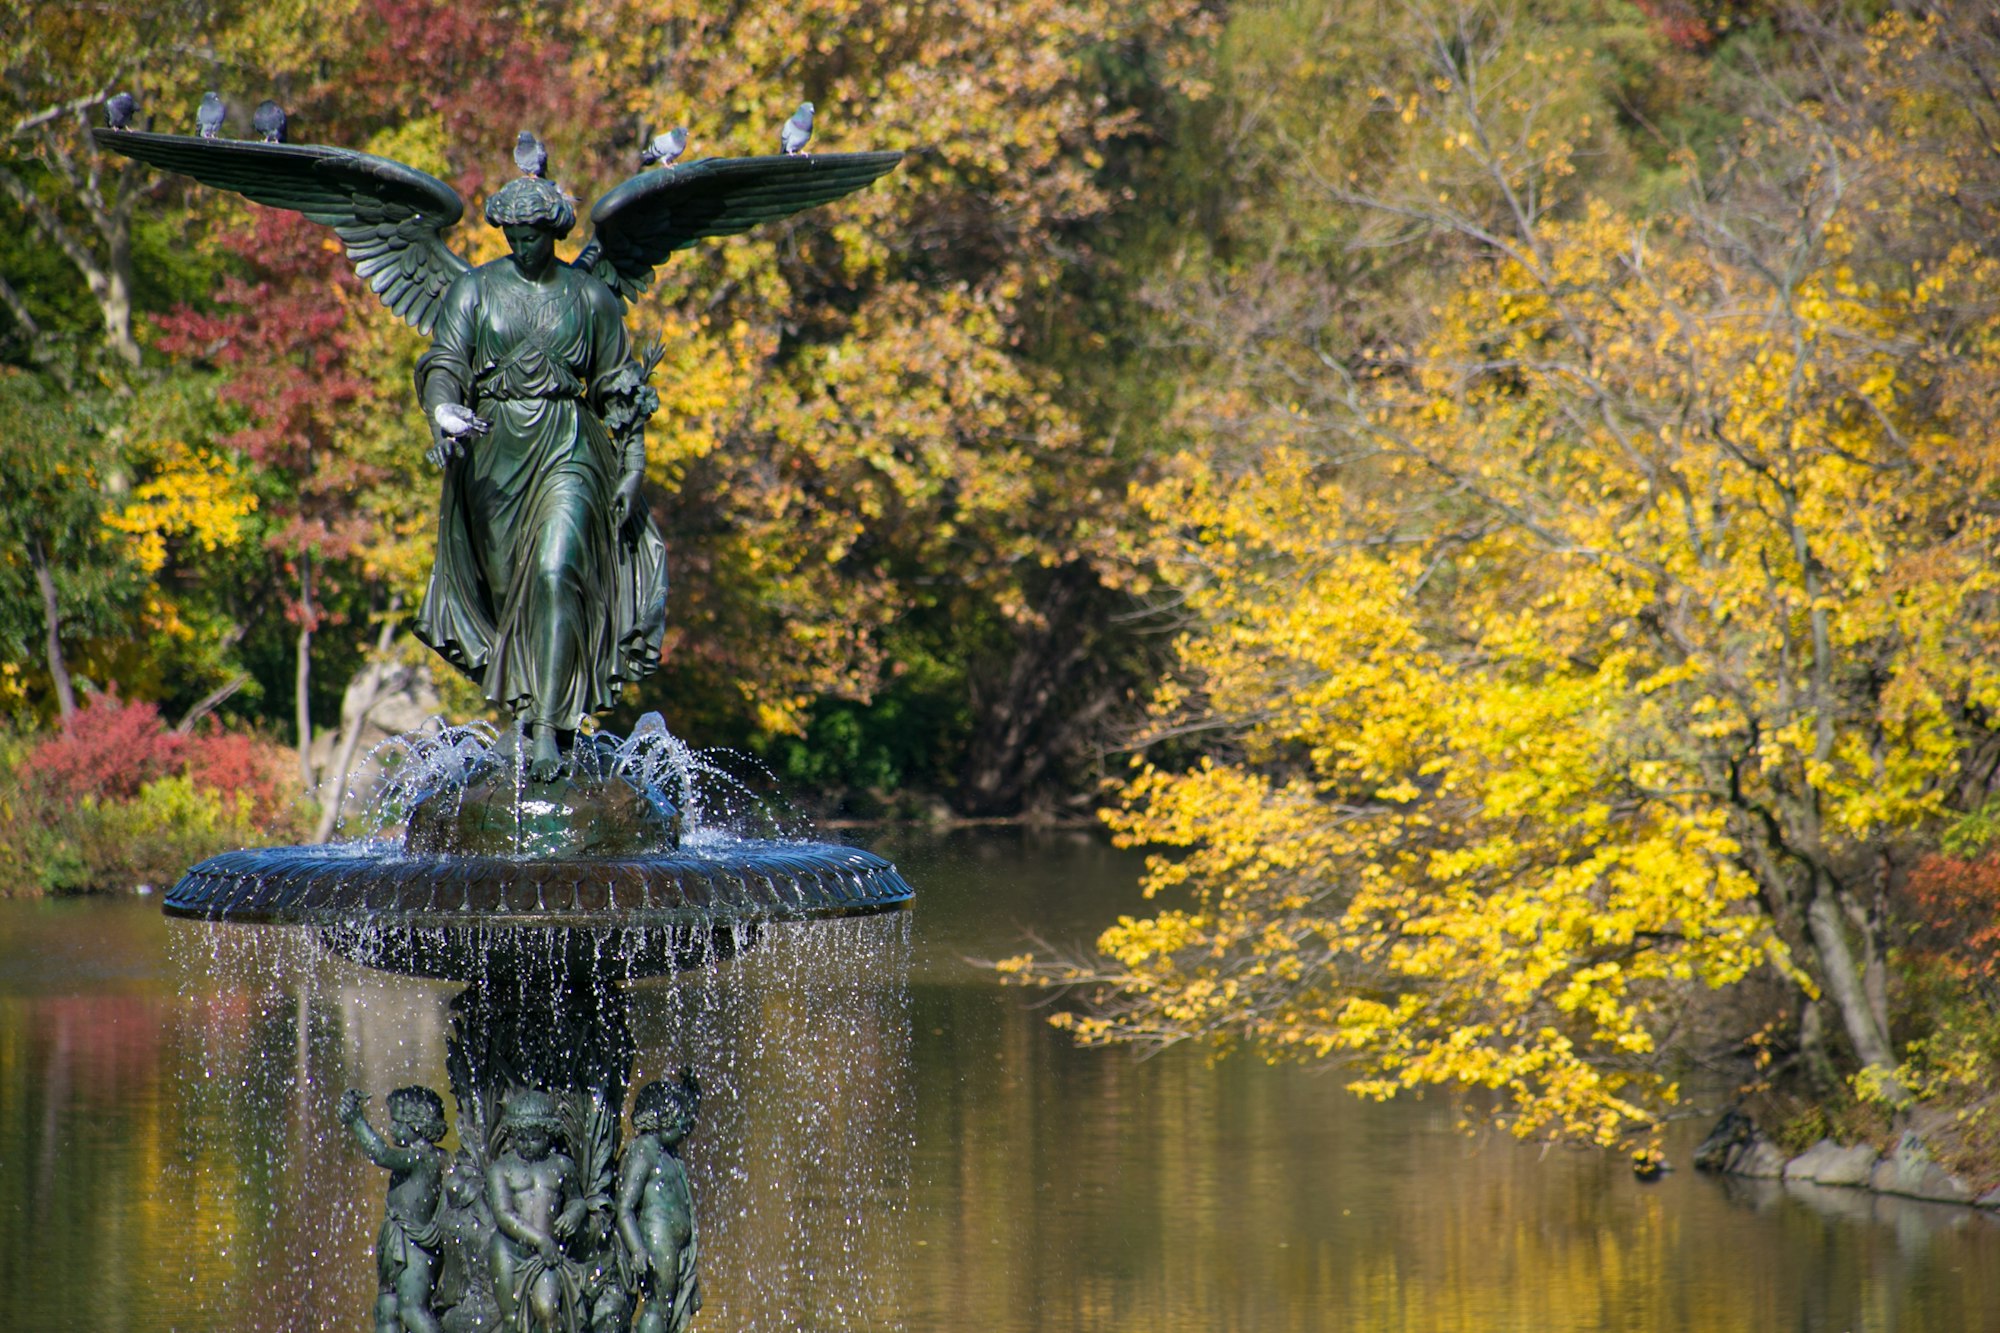 Bethesda Terrace and Fountain are two architectural features overlooking The Lake in New York City's Central Park. The fountain, with its Angel of the Waters statue, is located in the center of the terrace.